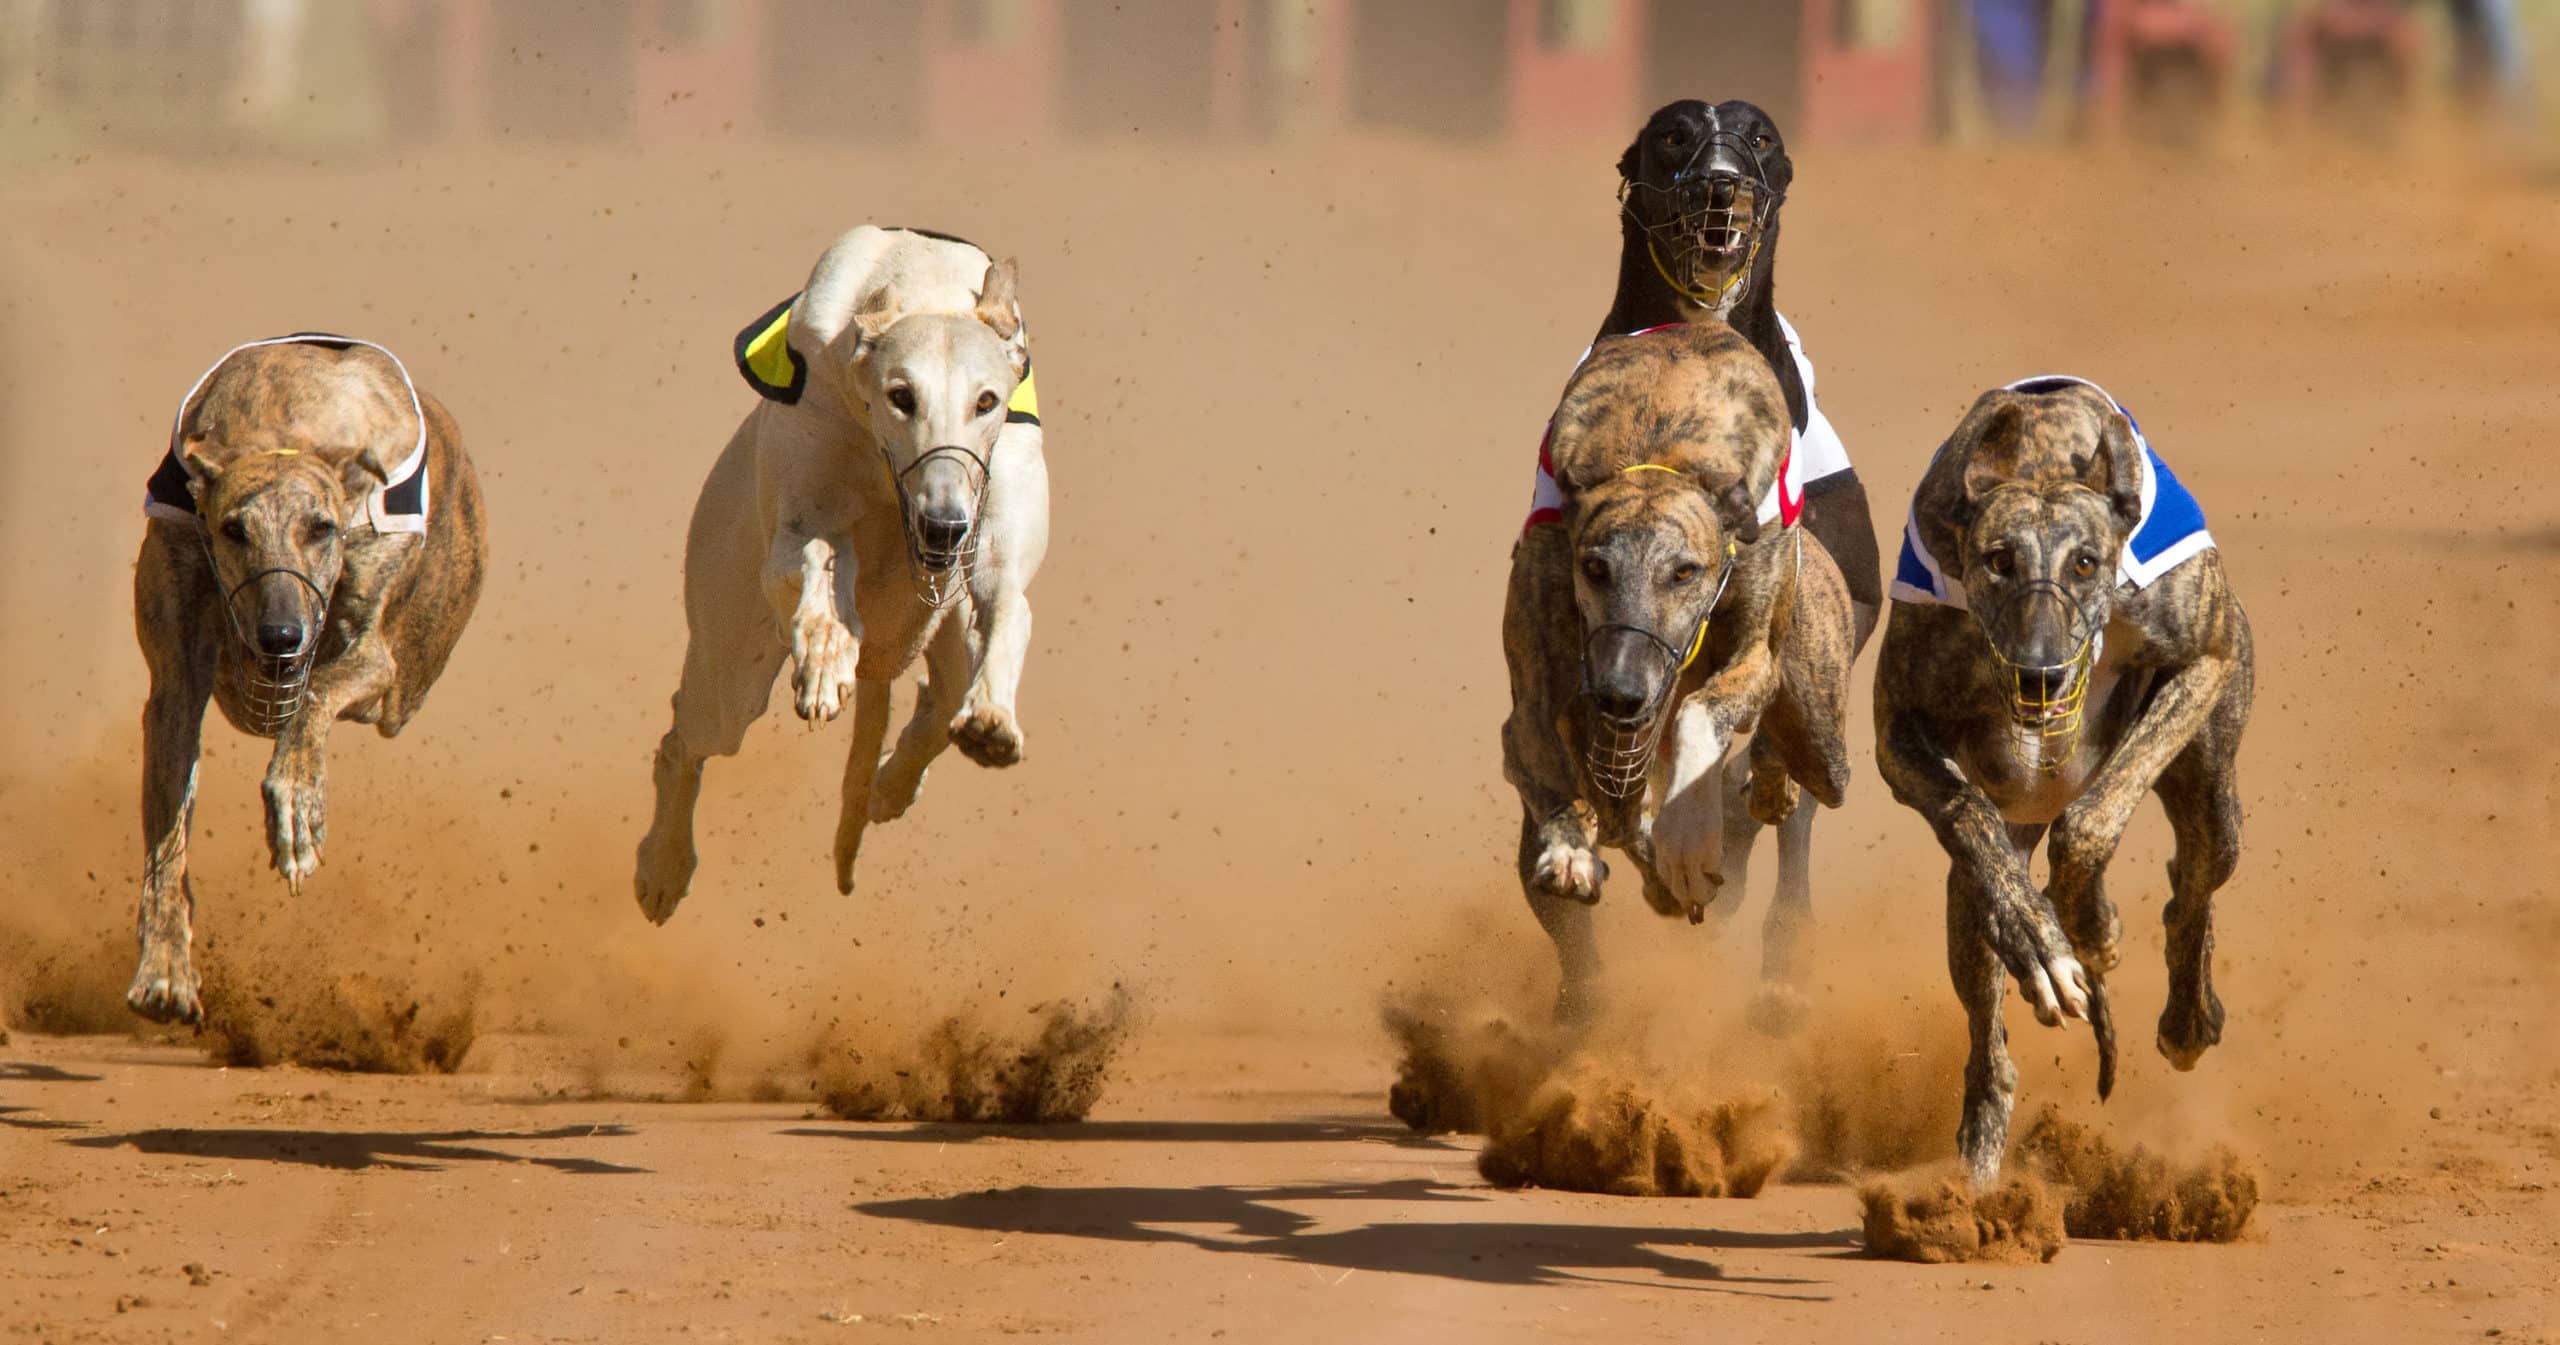 Companions not commodities—end greyhound exports now